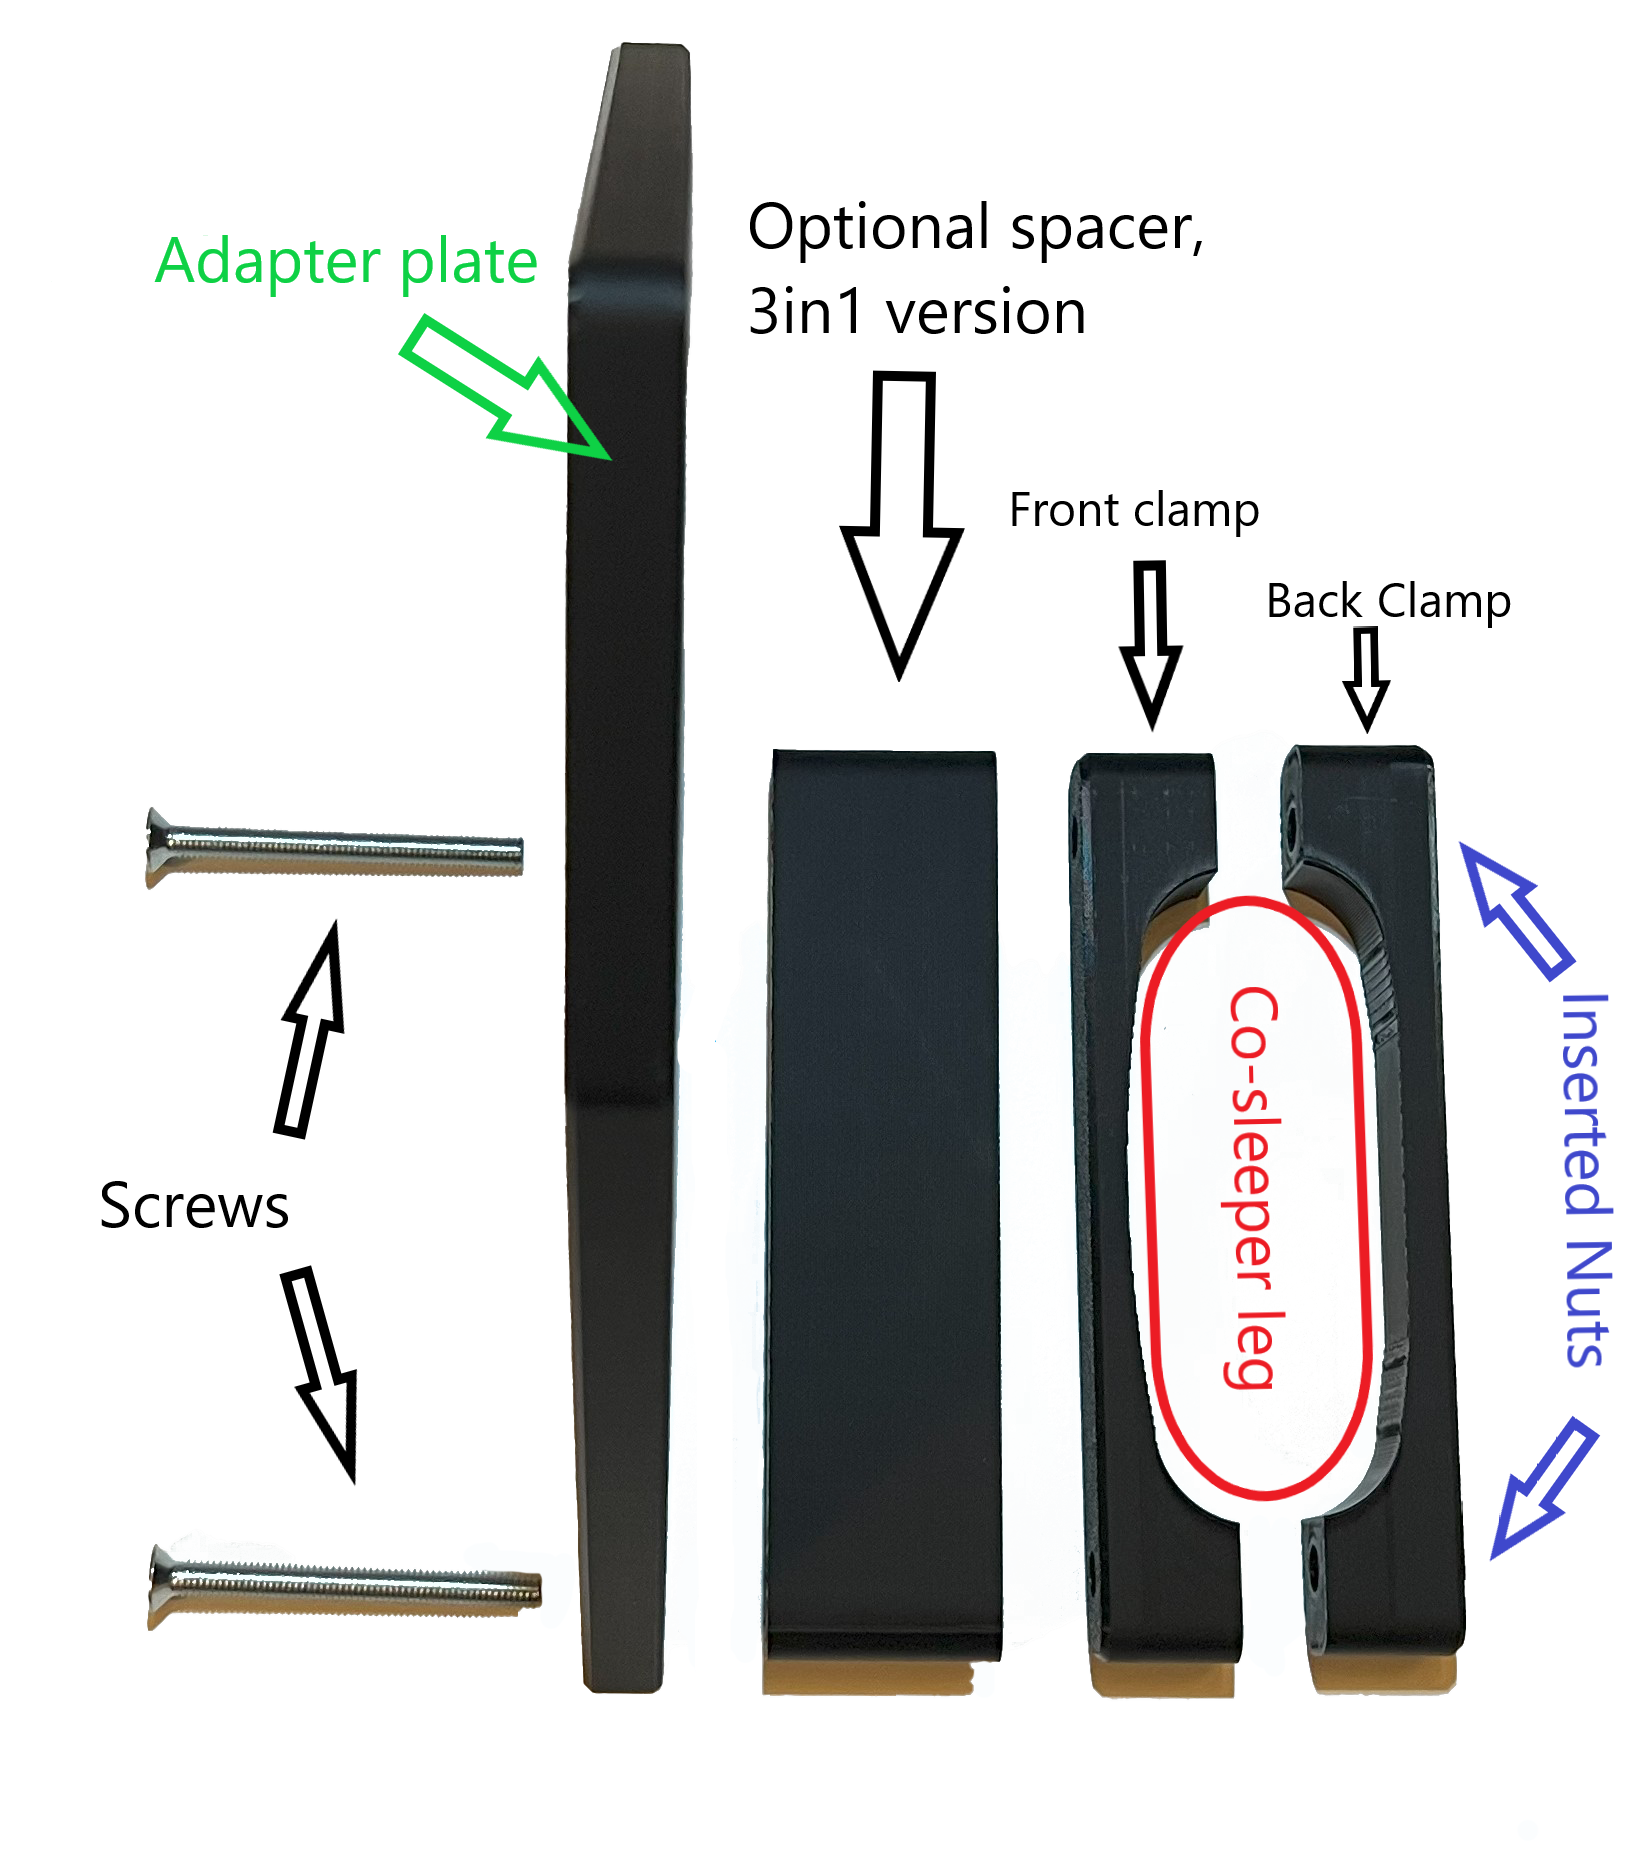 Shows the assembly of the adapter bracket for the Maxicosi iora co sleeper